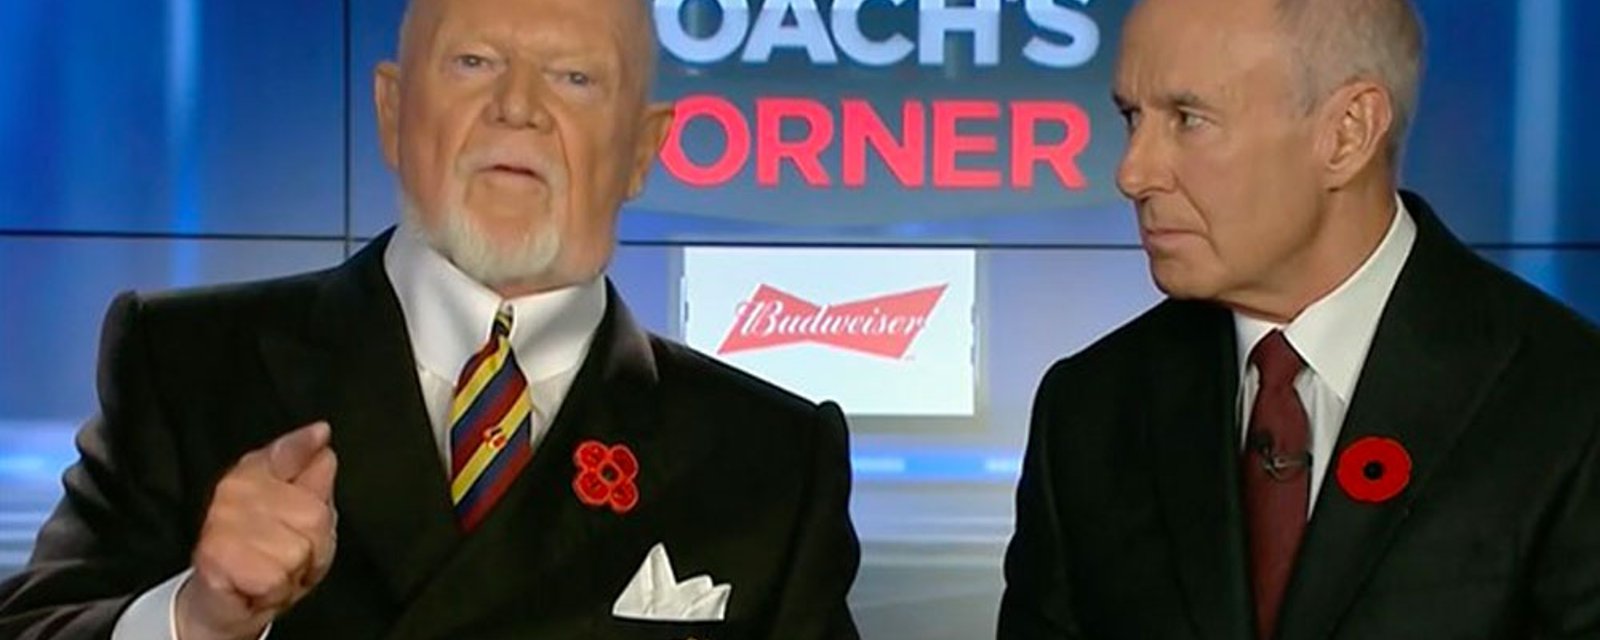 Don Cherry saying the exact same thing that got him fired, but 22 years ago